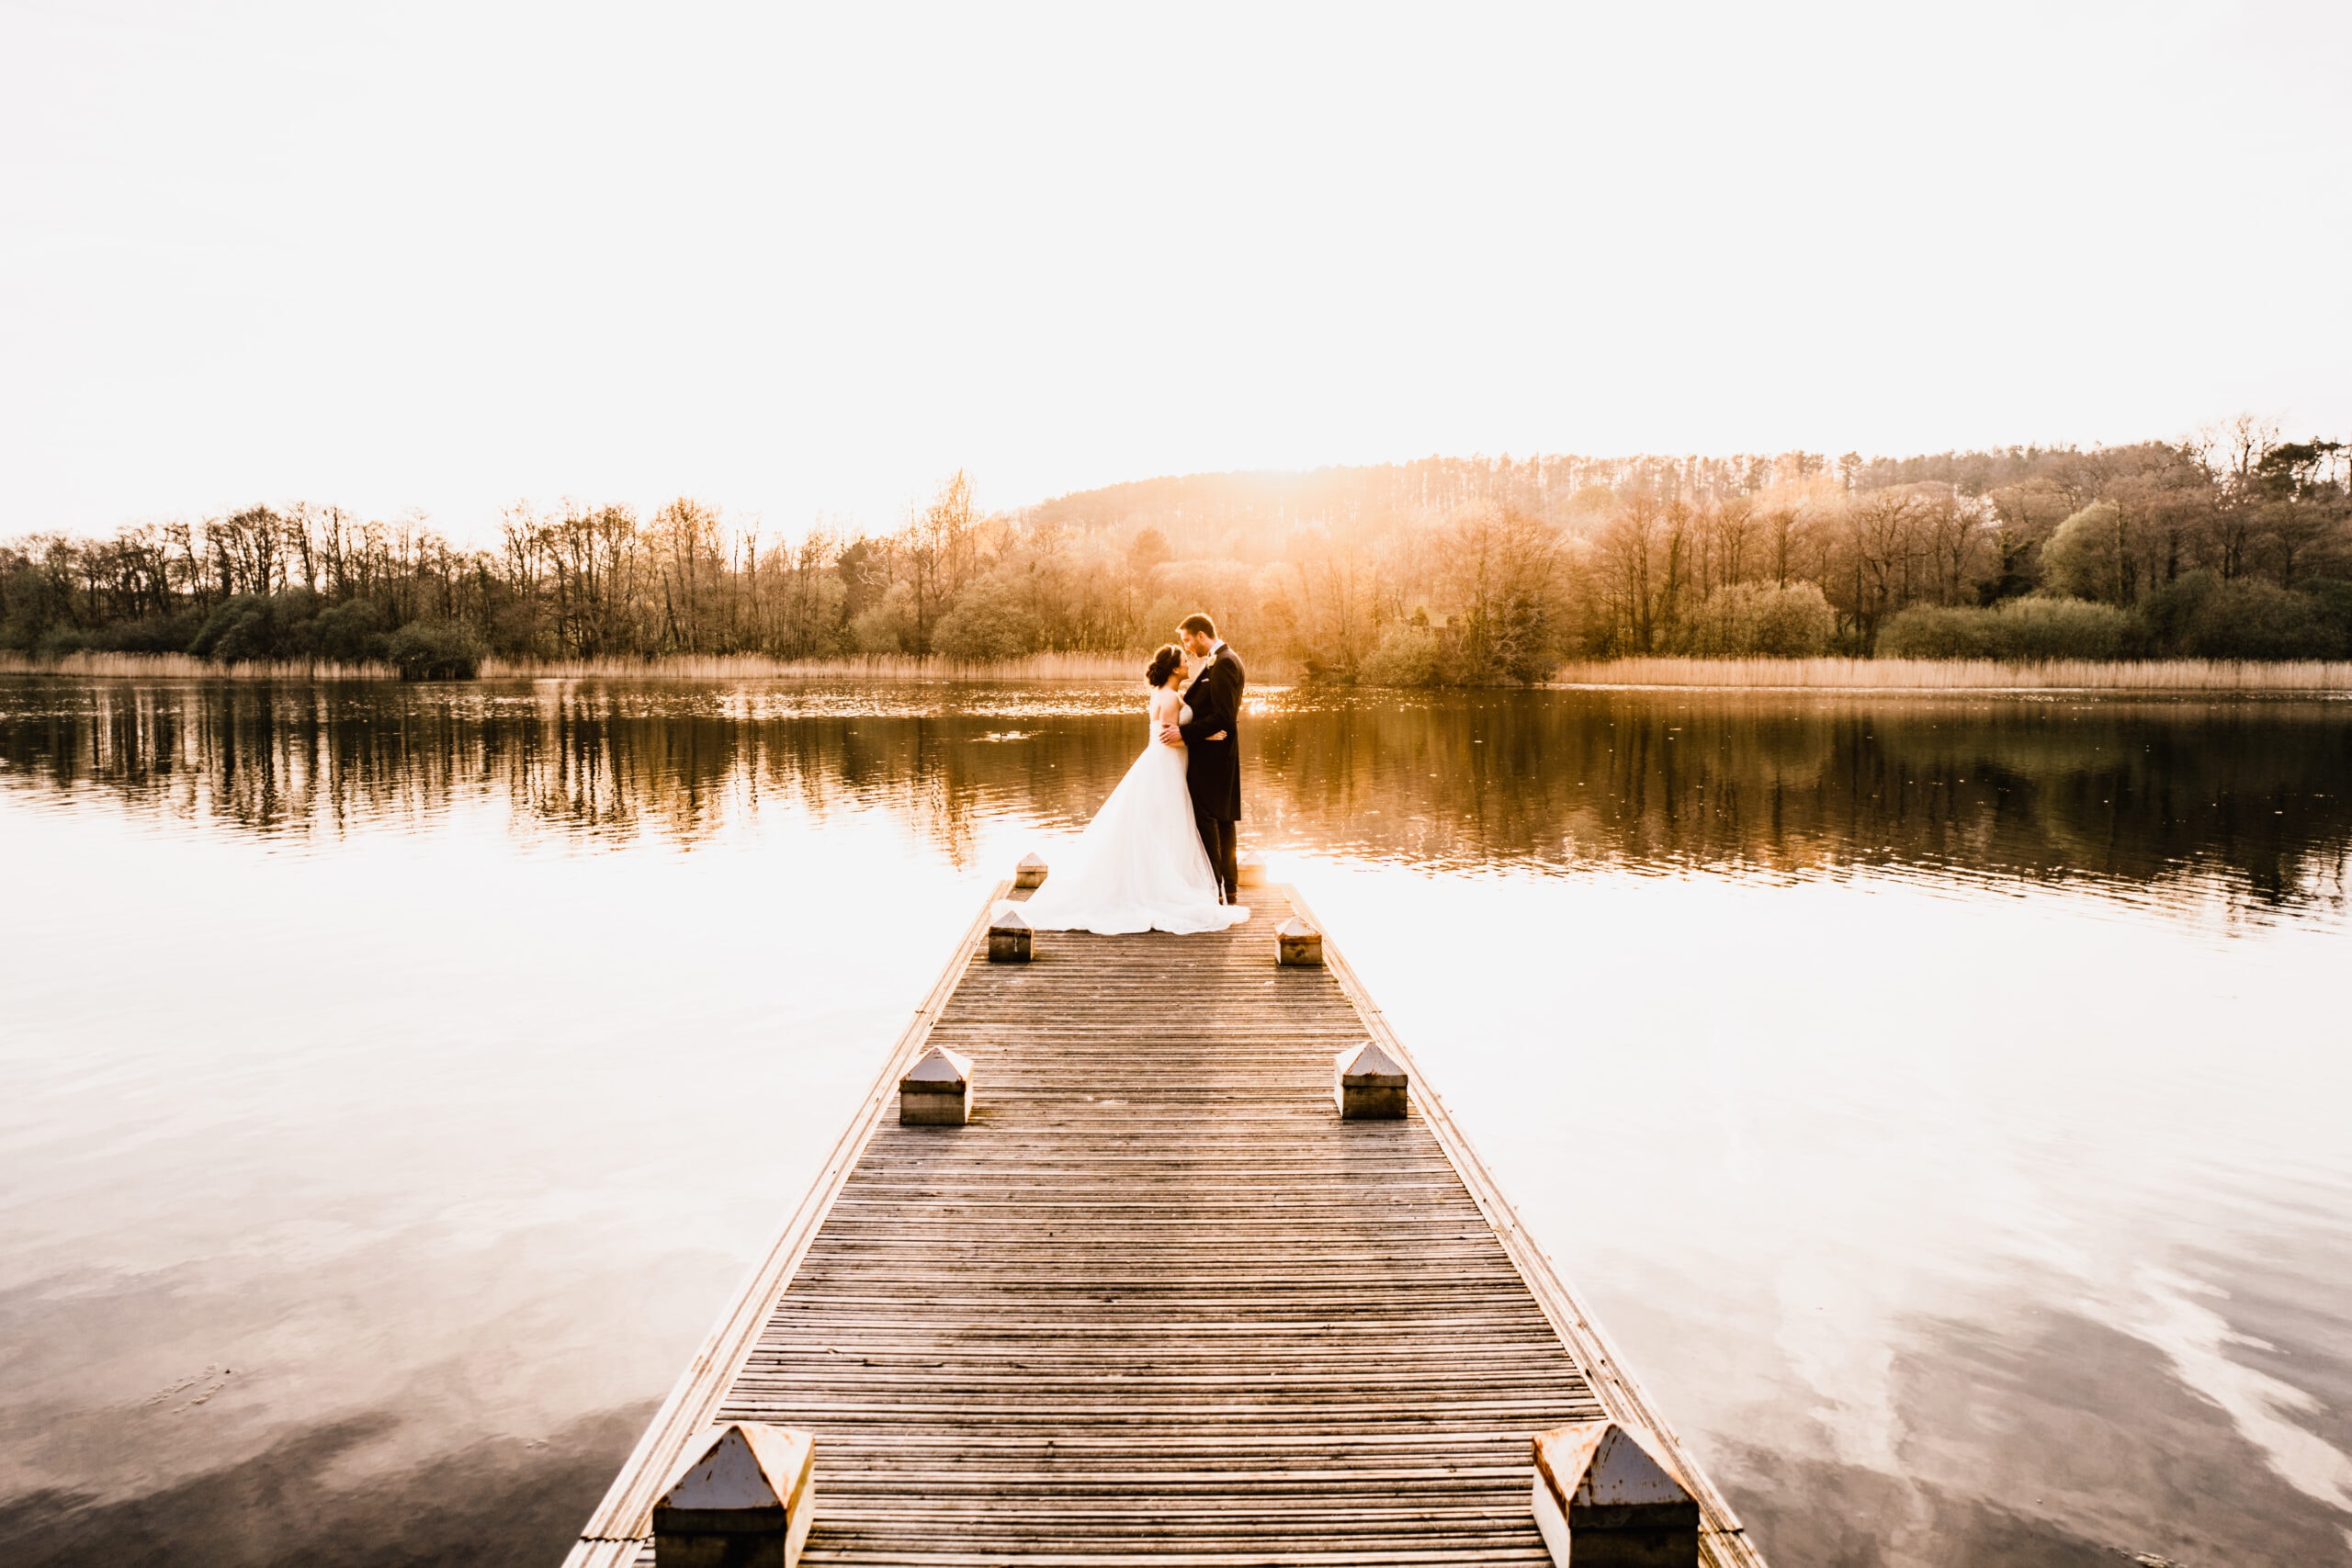 A bride and groom embrace at the end of a wooden dock, overlooking a serene lake at sunset, with warm sunlight casting a golden glow over the scene.